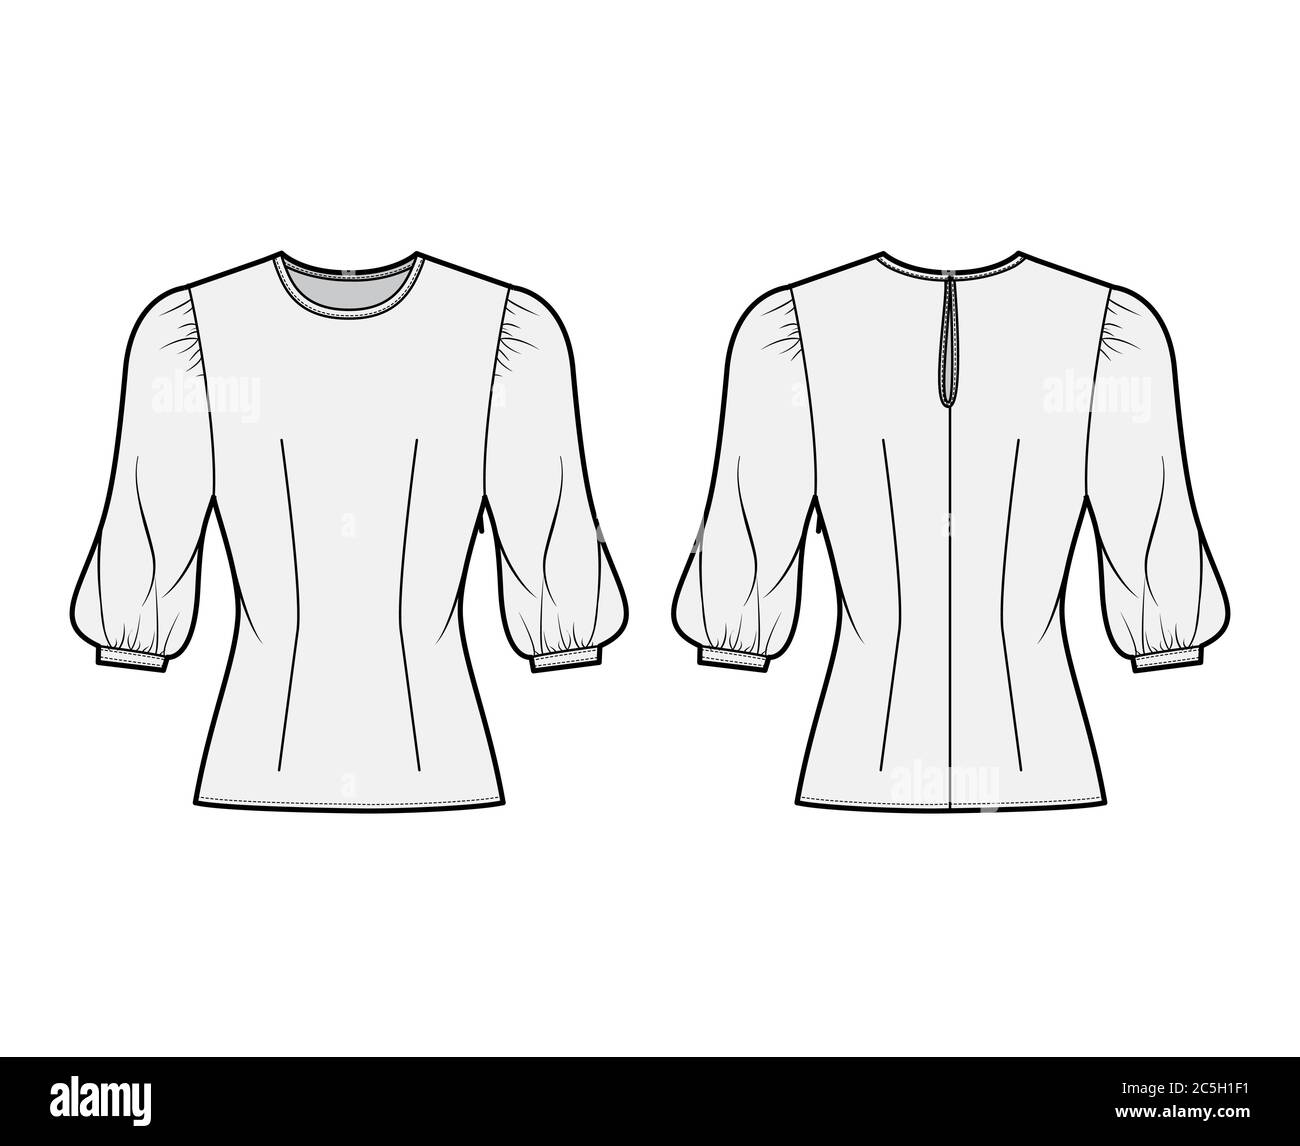 Blouse technical fashion illustration with round neckline, puffy mutton sleeves, fitted body. Flat apparel template front, back grey color. Women, men unisex CAD garment designer mockup Stock Vector